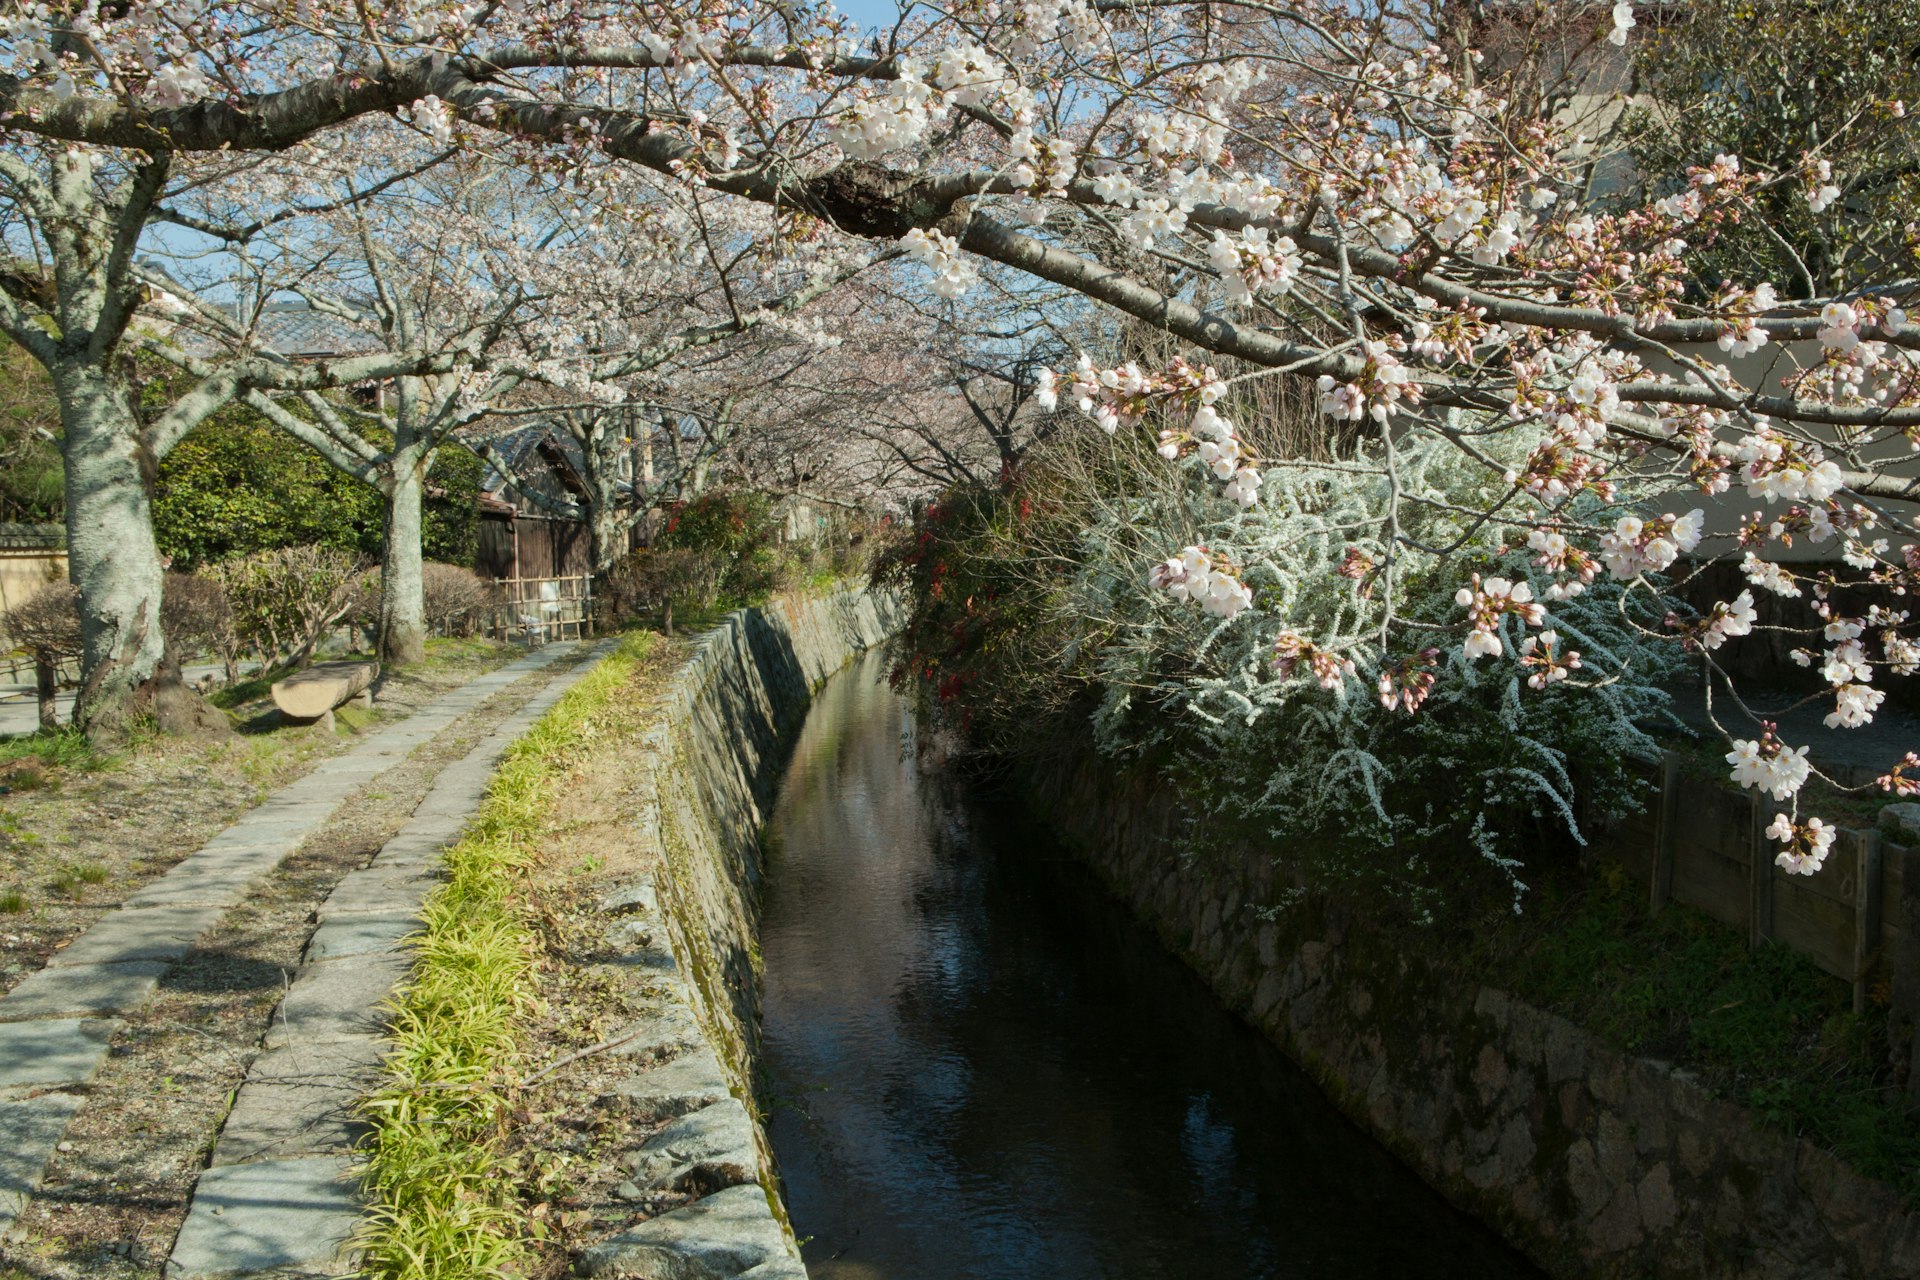 The “Philosopher’s Path” – a stone pathway alongside a small canal and cherry trees in blossom – in Kyoto